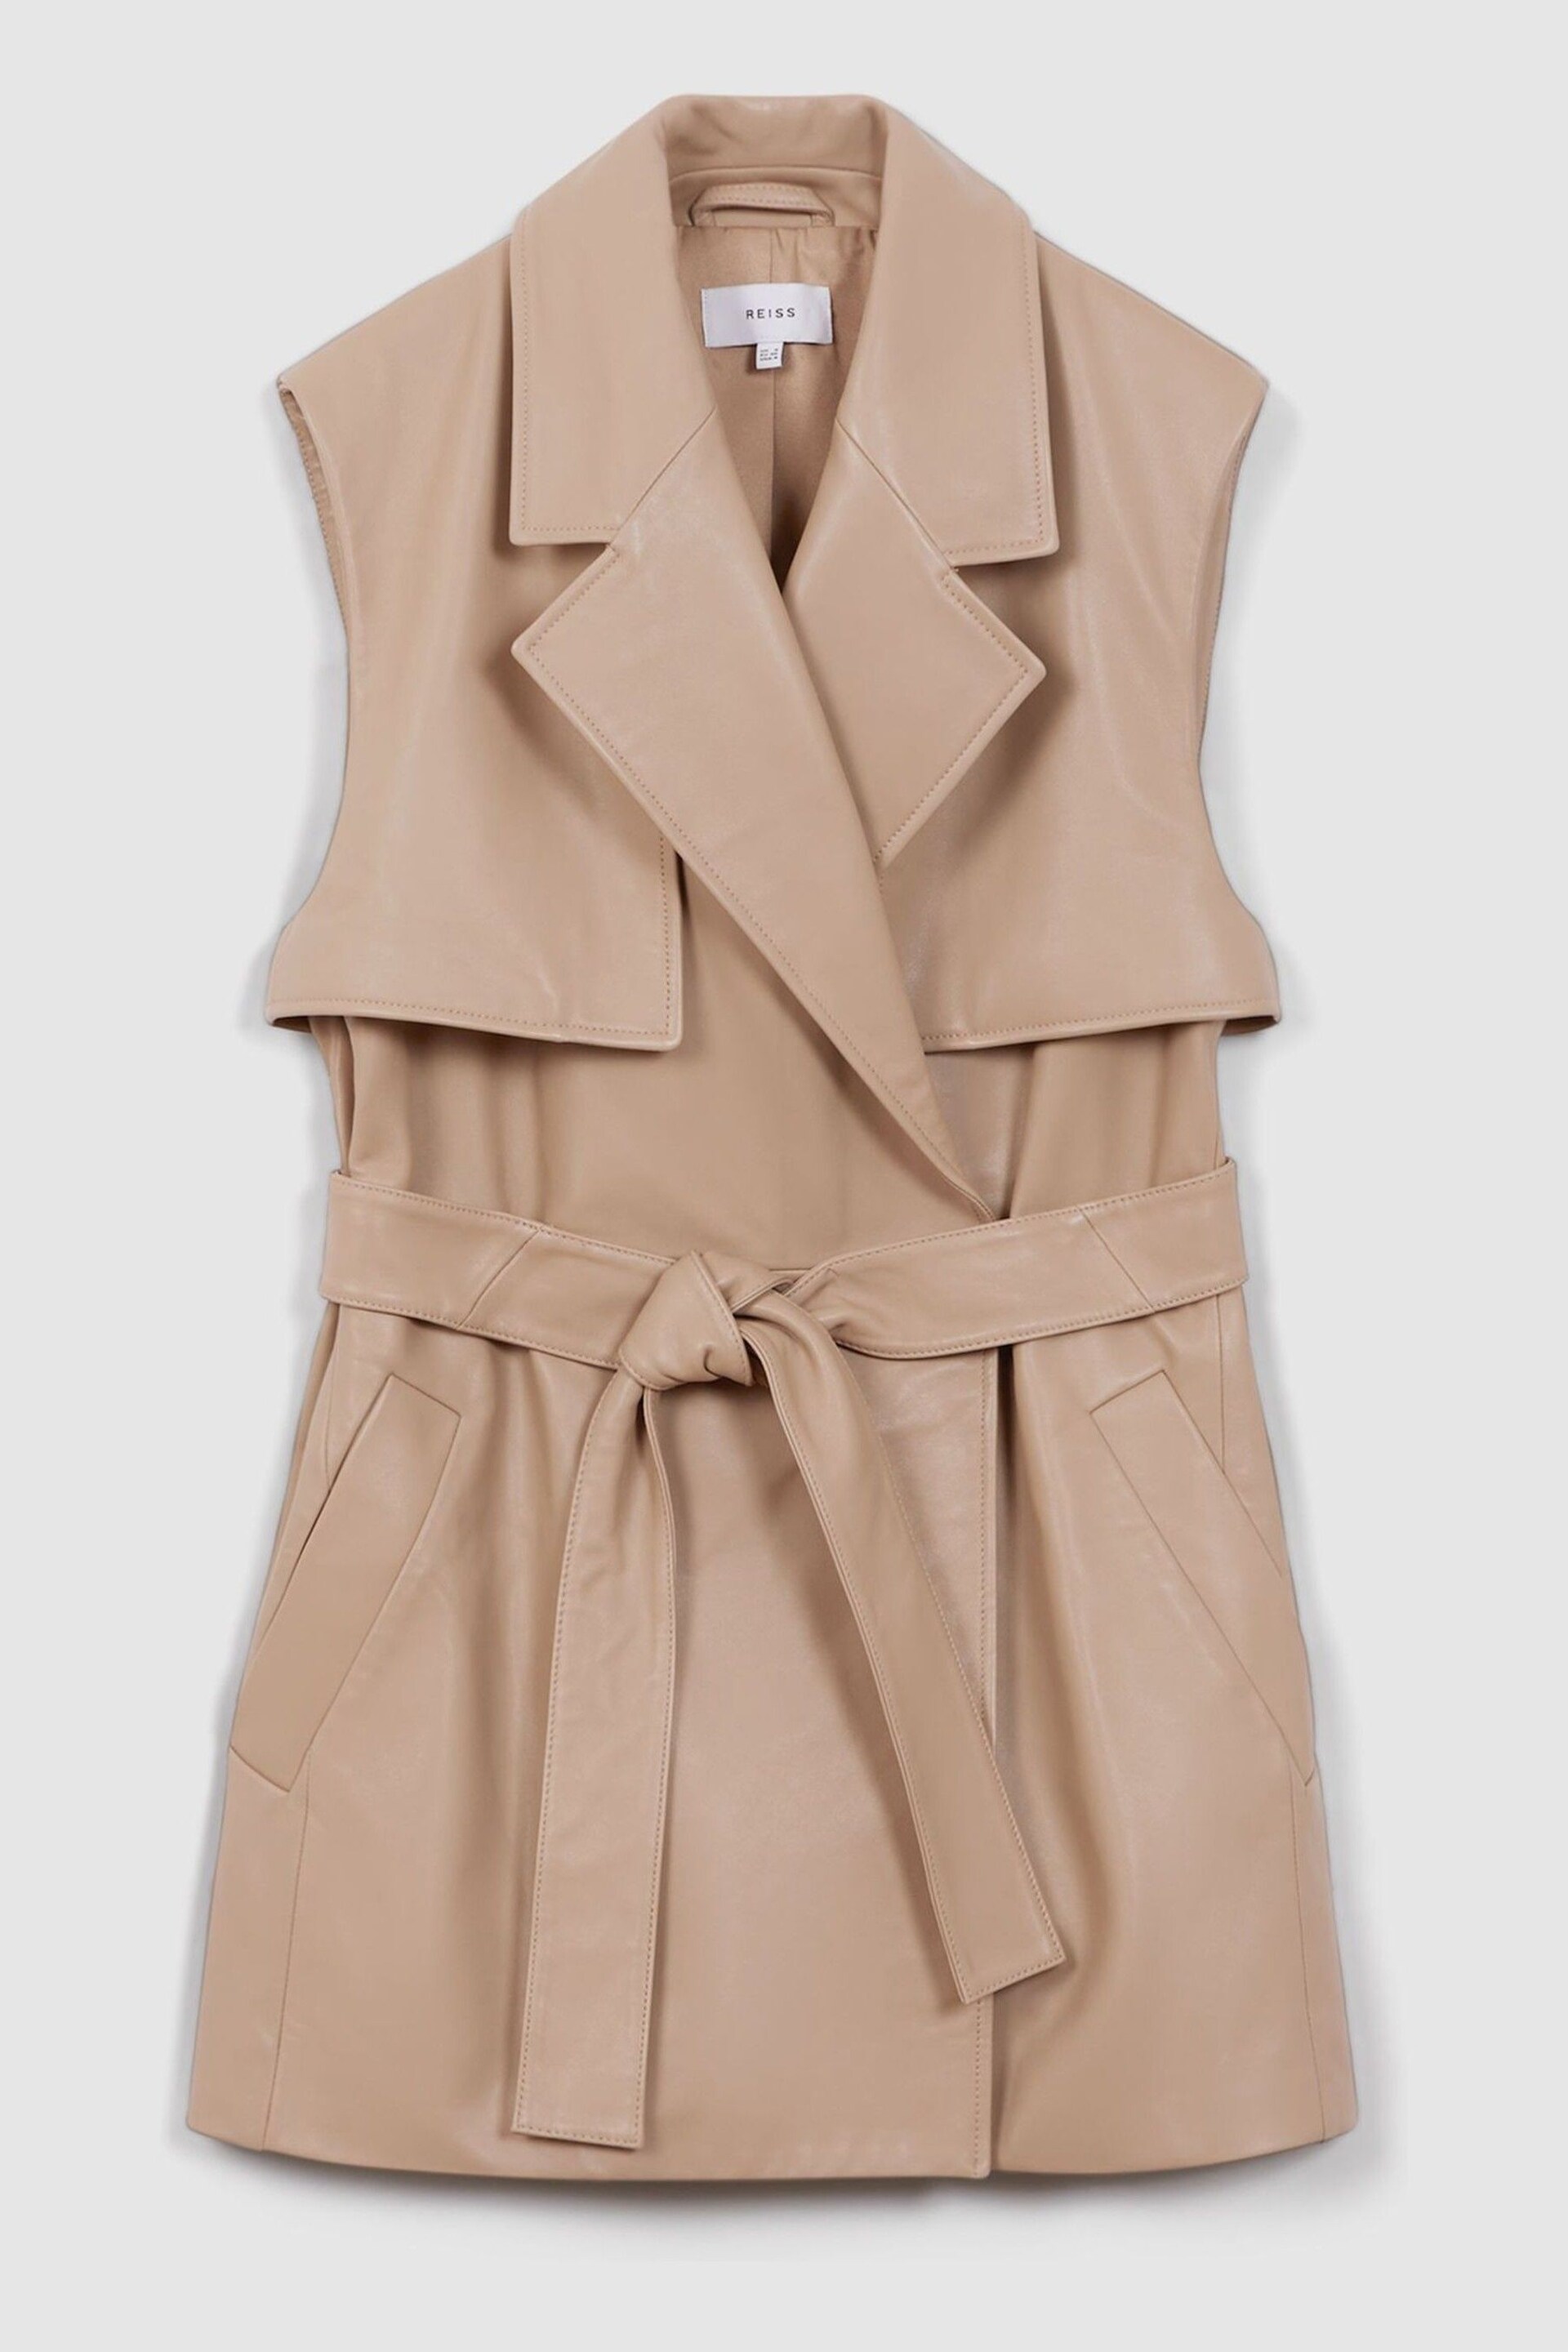 Reiss Neutral Everley Leather Double Breasted Gilet - Image 2 of 7